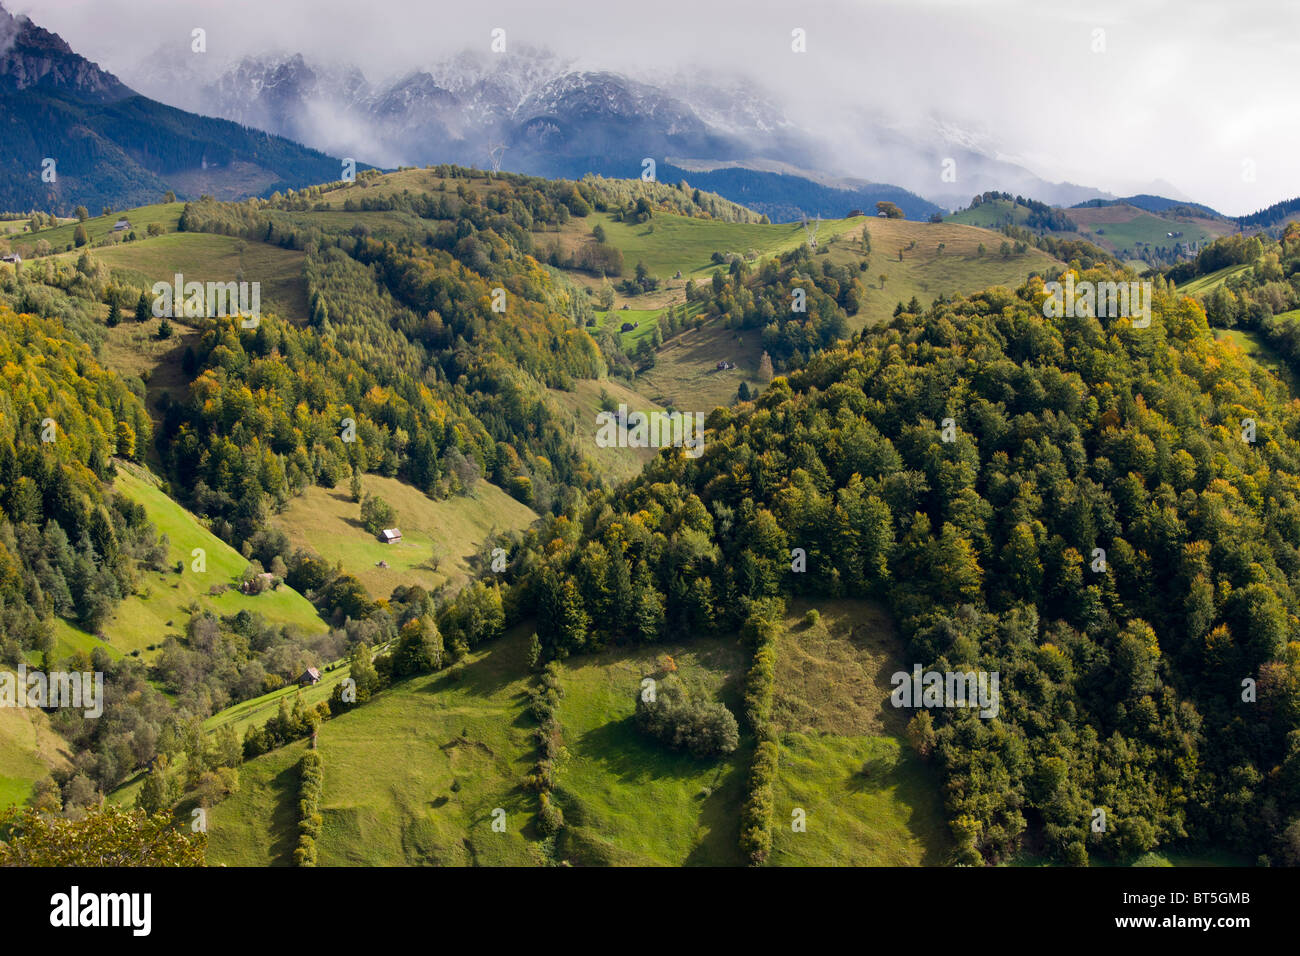 The Leaota Mountains (part of the southern Carpathians) south of Bran with the first snow of autumn. Romania Stock Photo